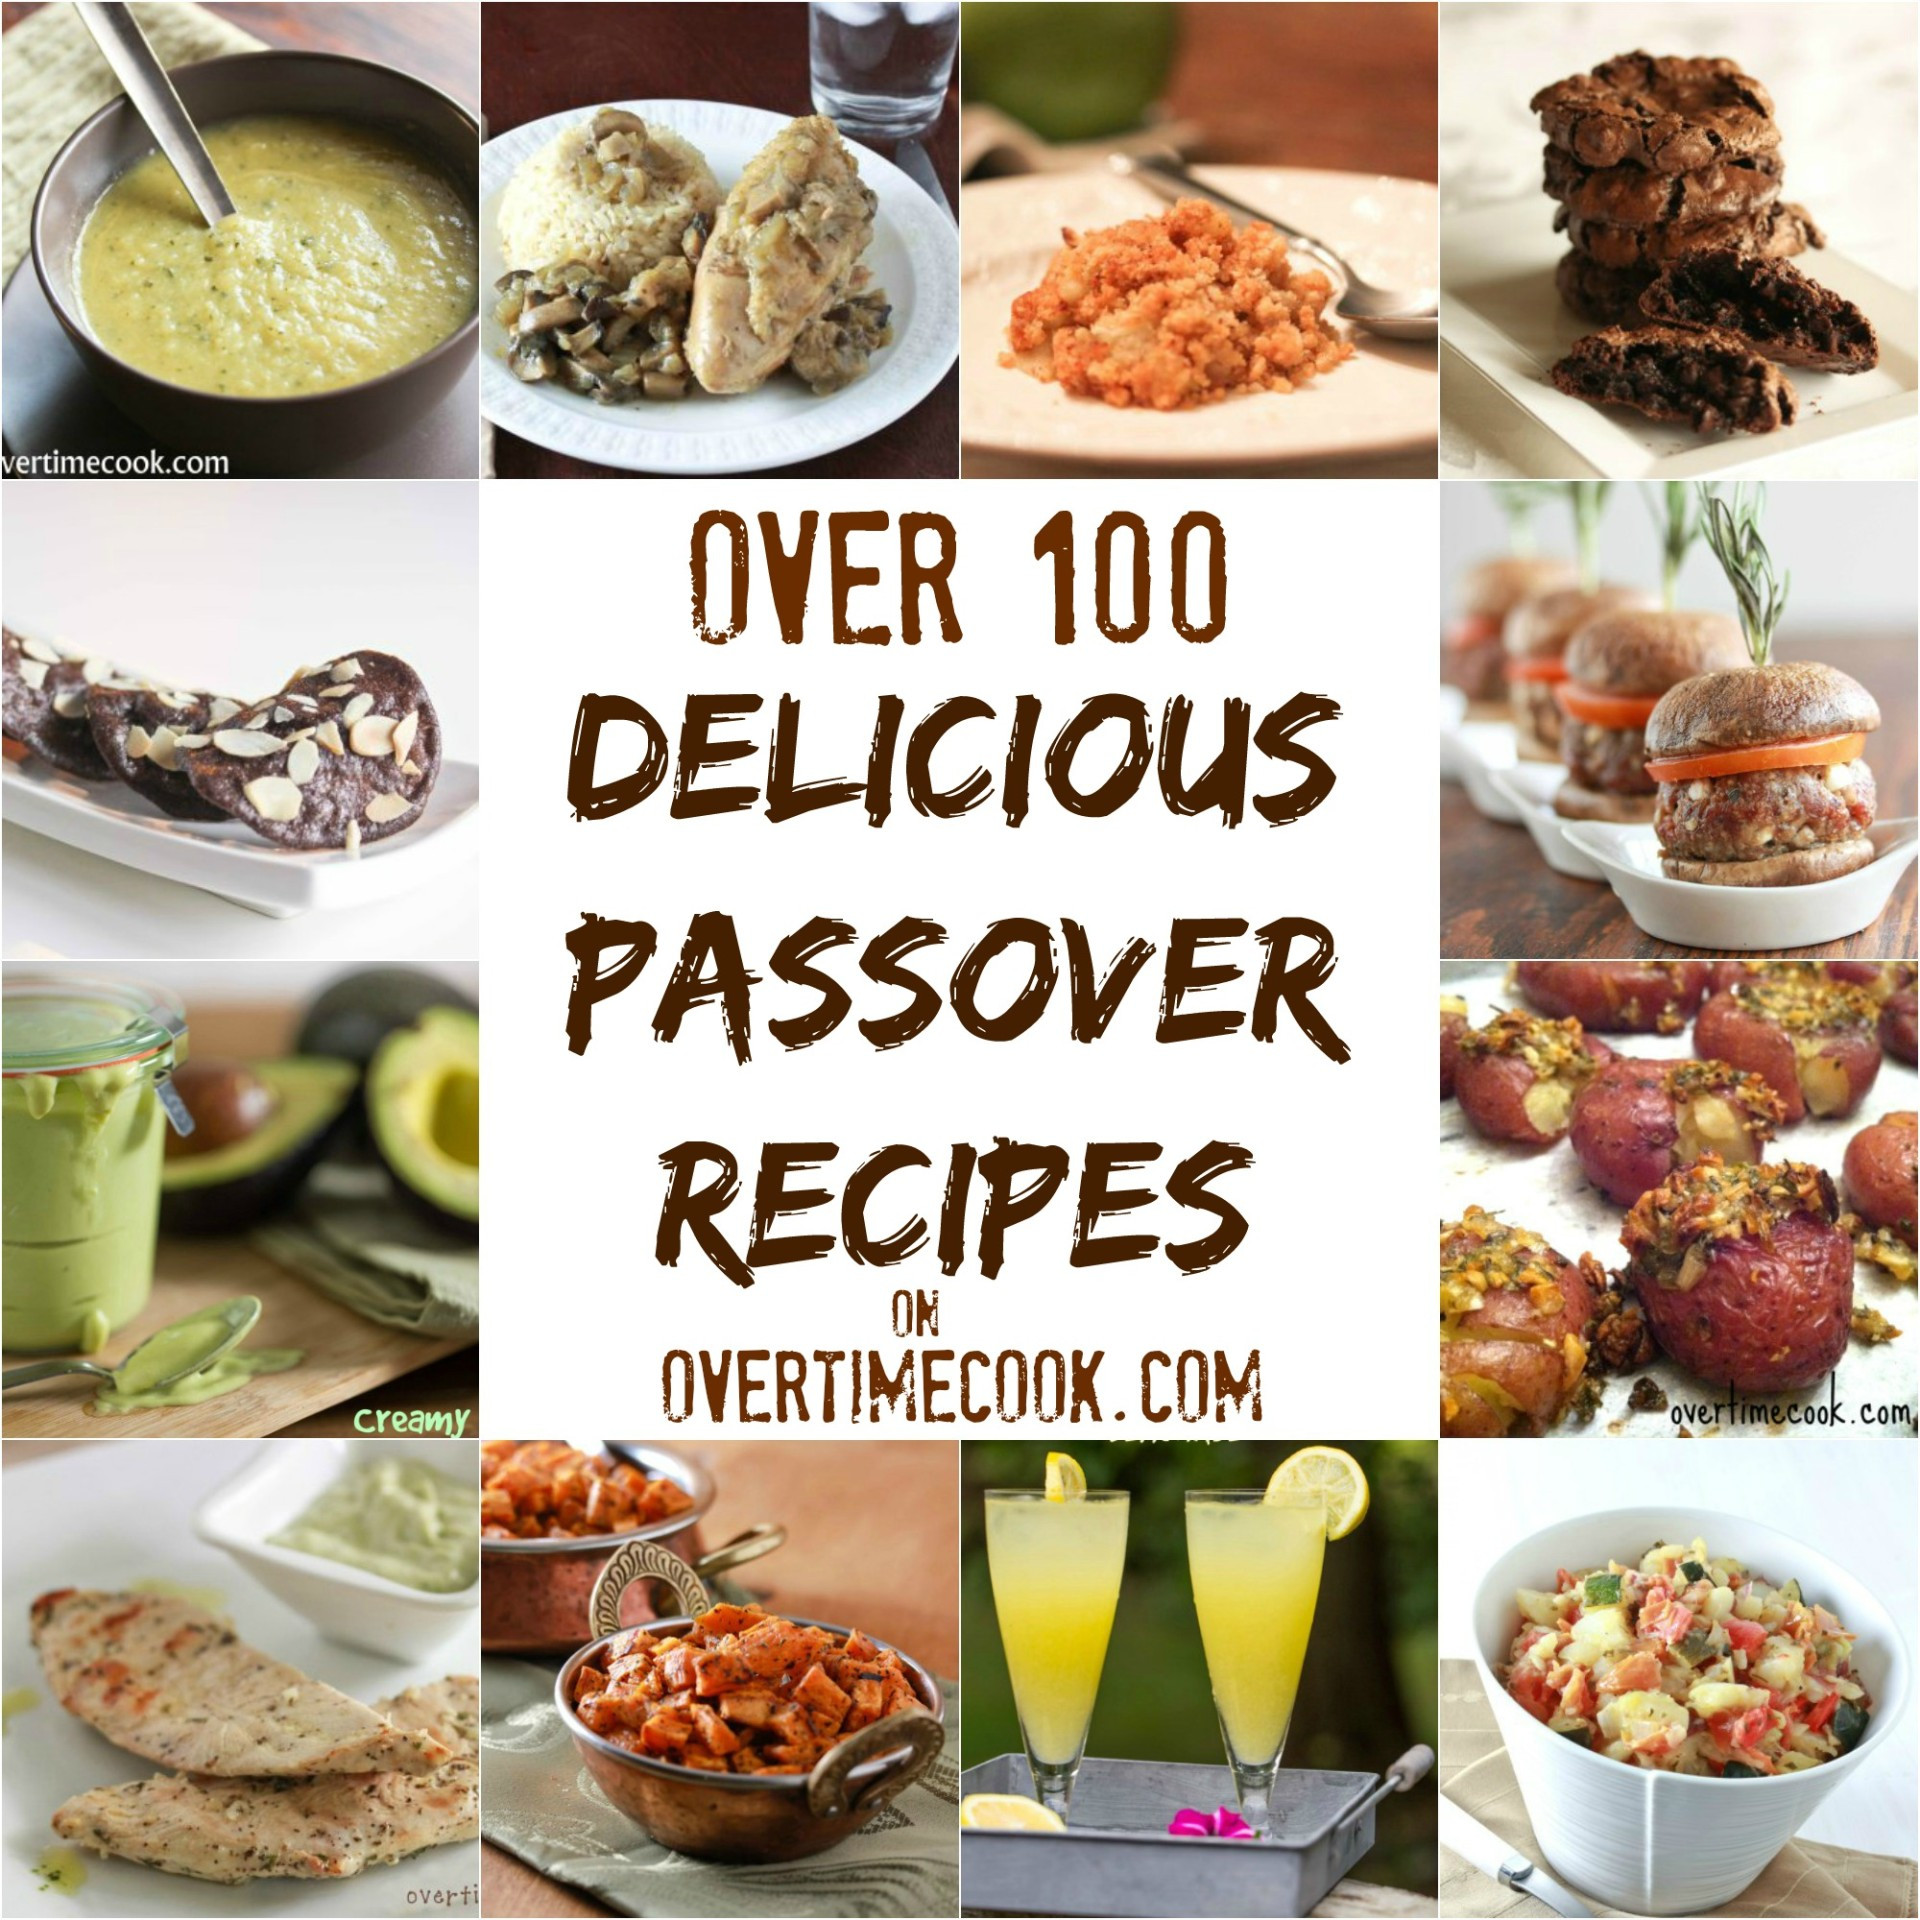 Food For Passover
 Over 100 Delicious Passover Recipes Overtime Cook